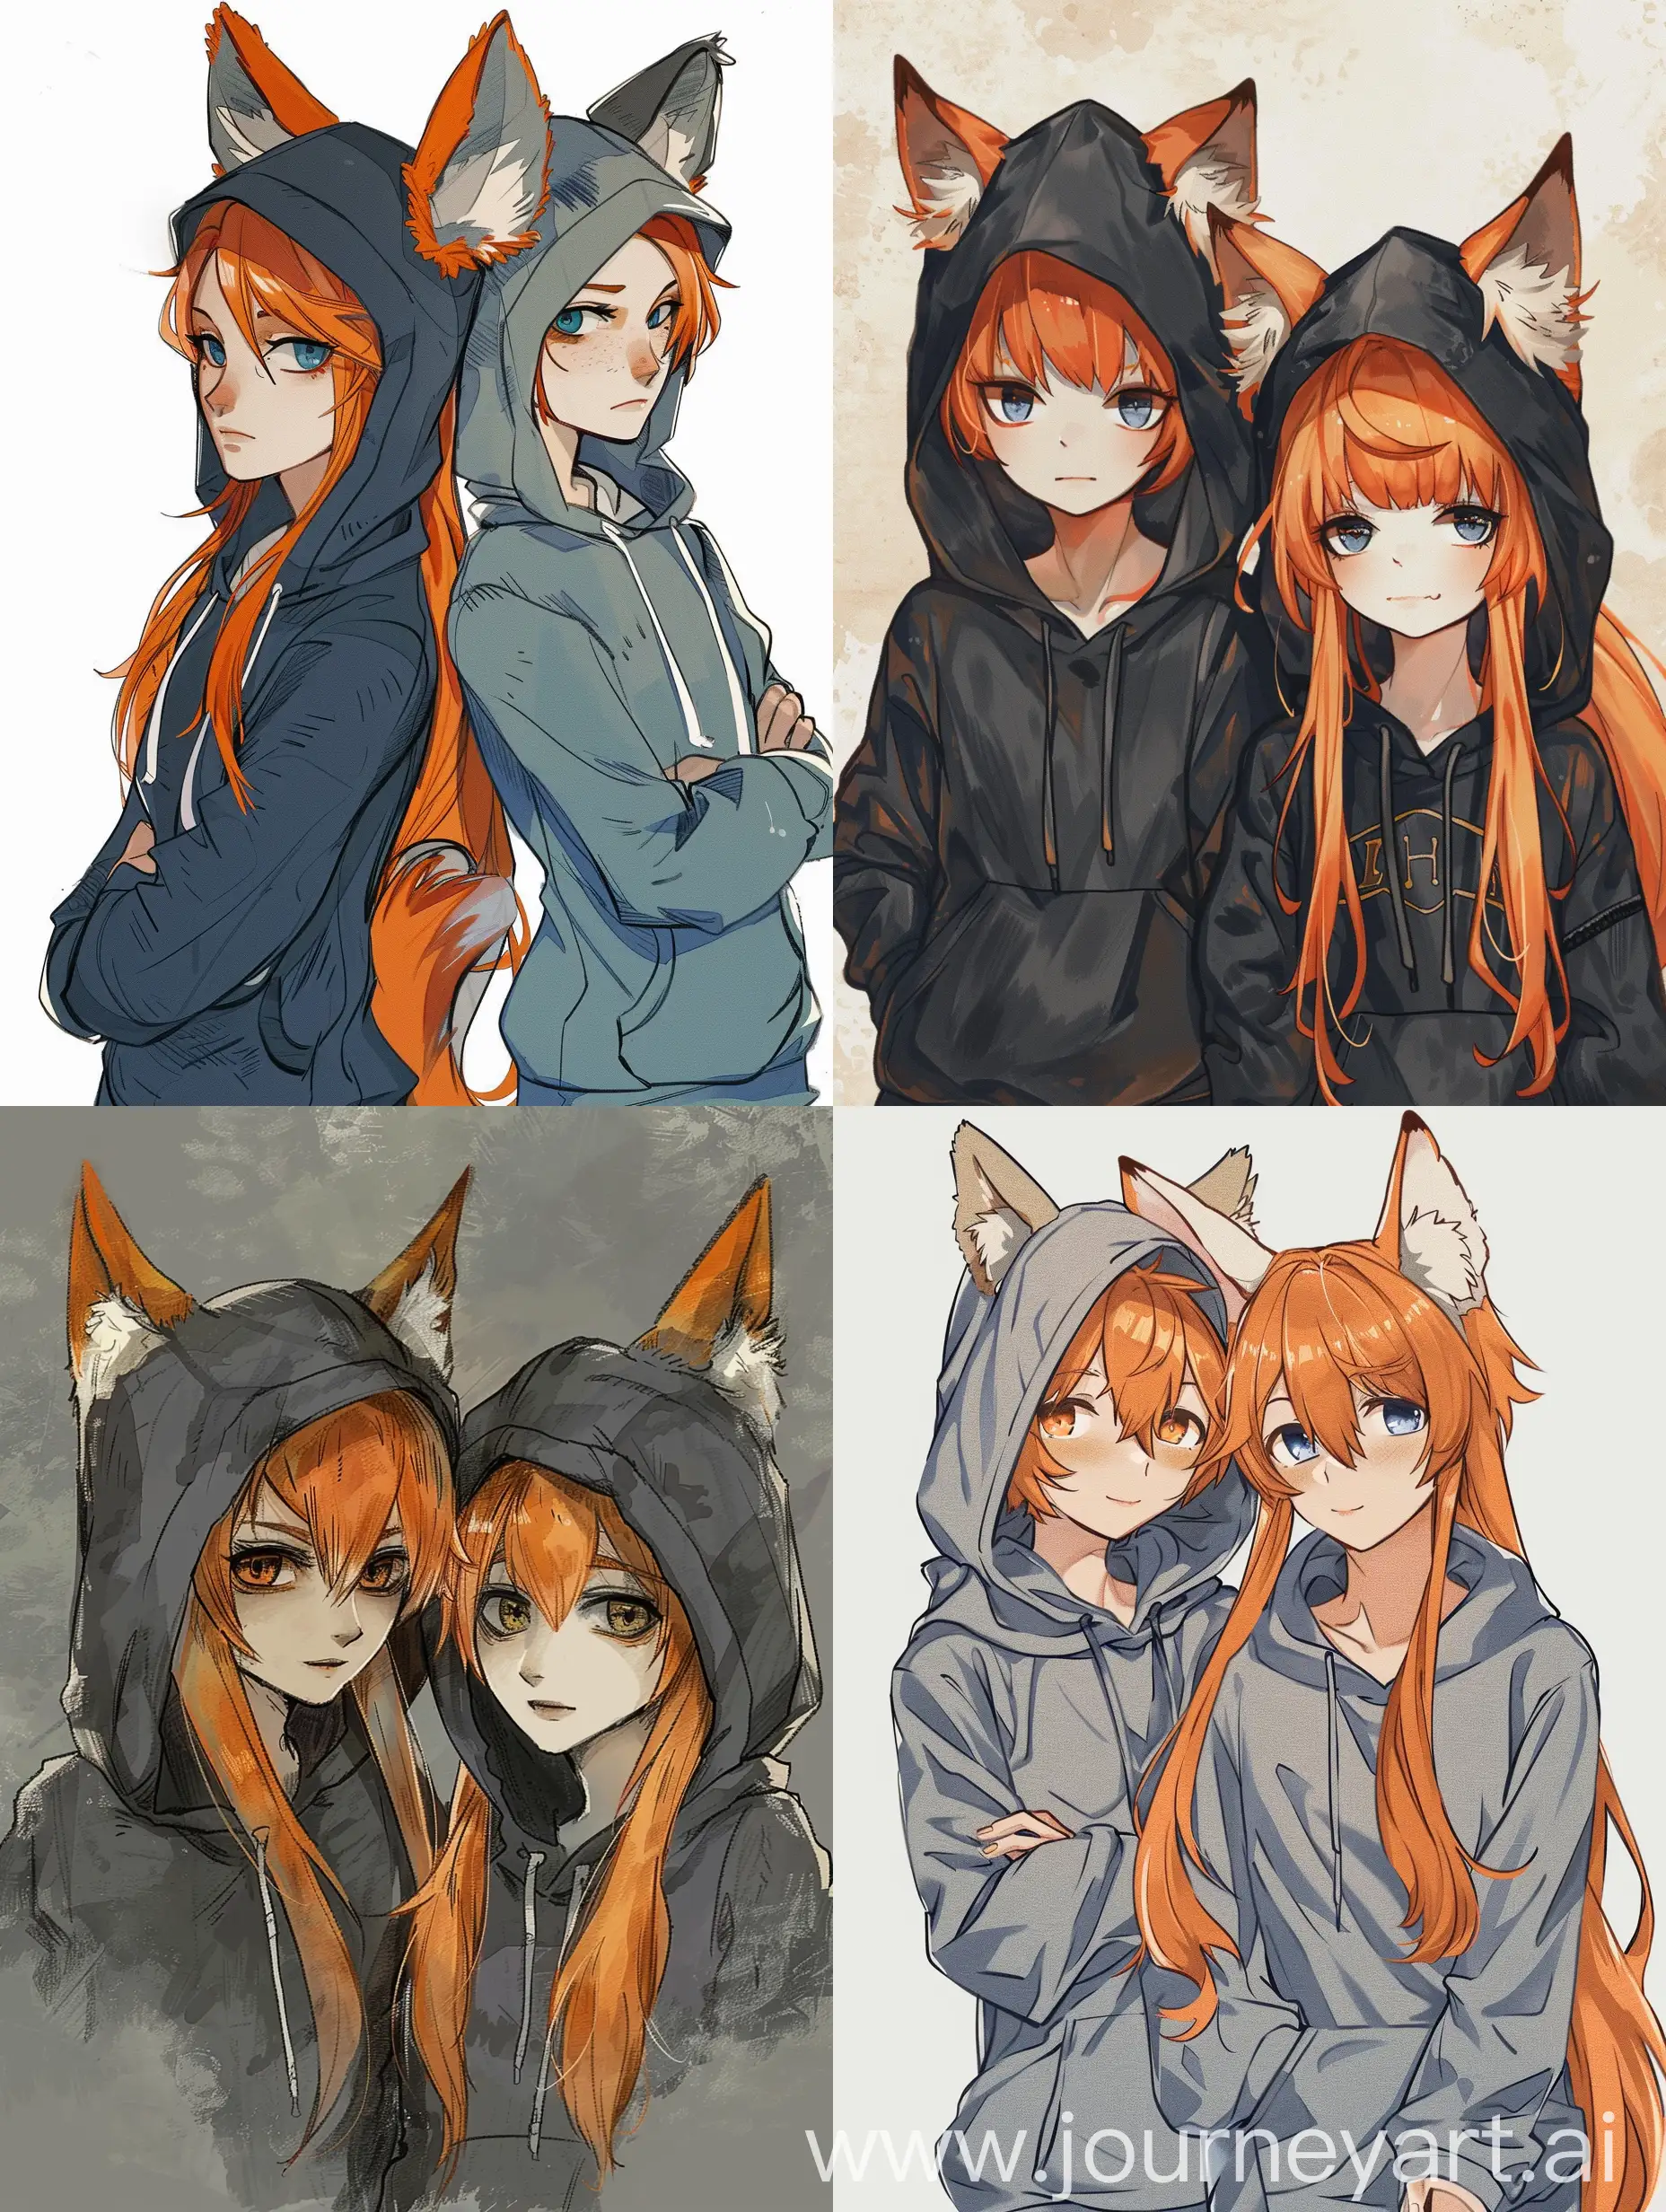 Playful-Siblings-Cute-FoxEared-Sister-and-Brother-in-Matching-Orange-Hoodies